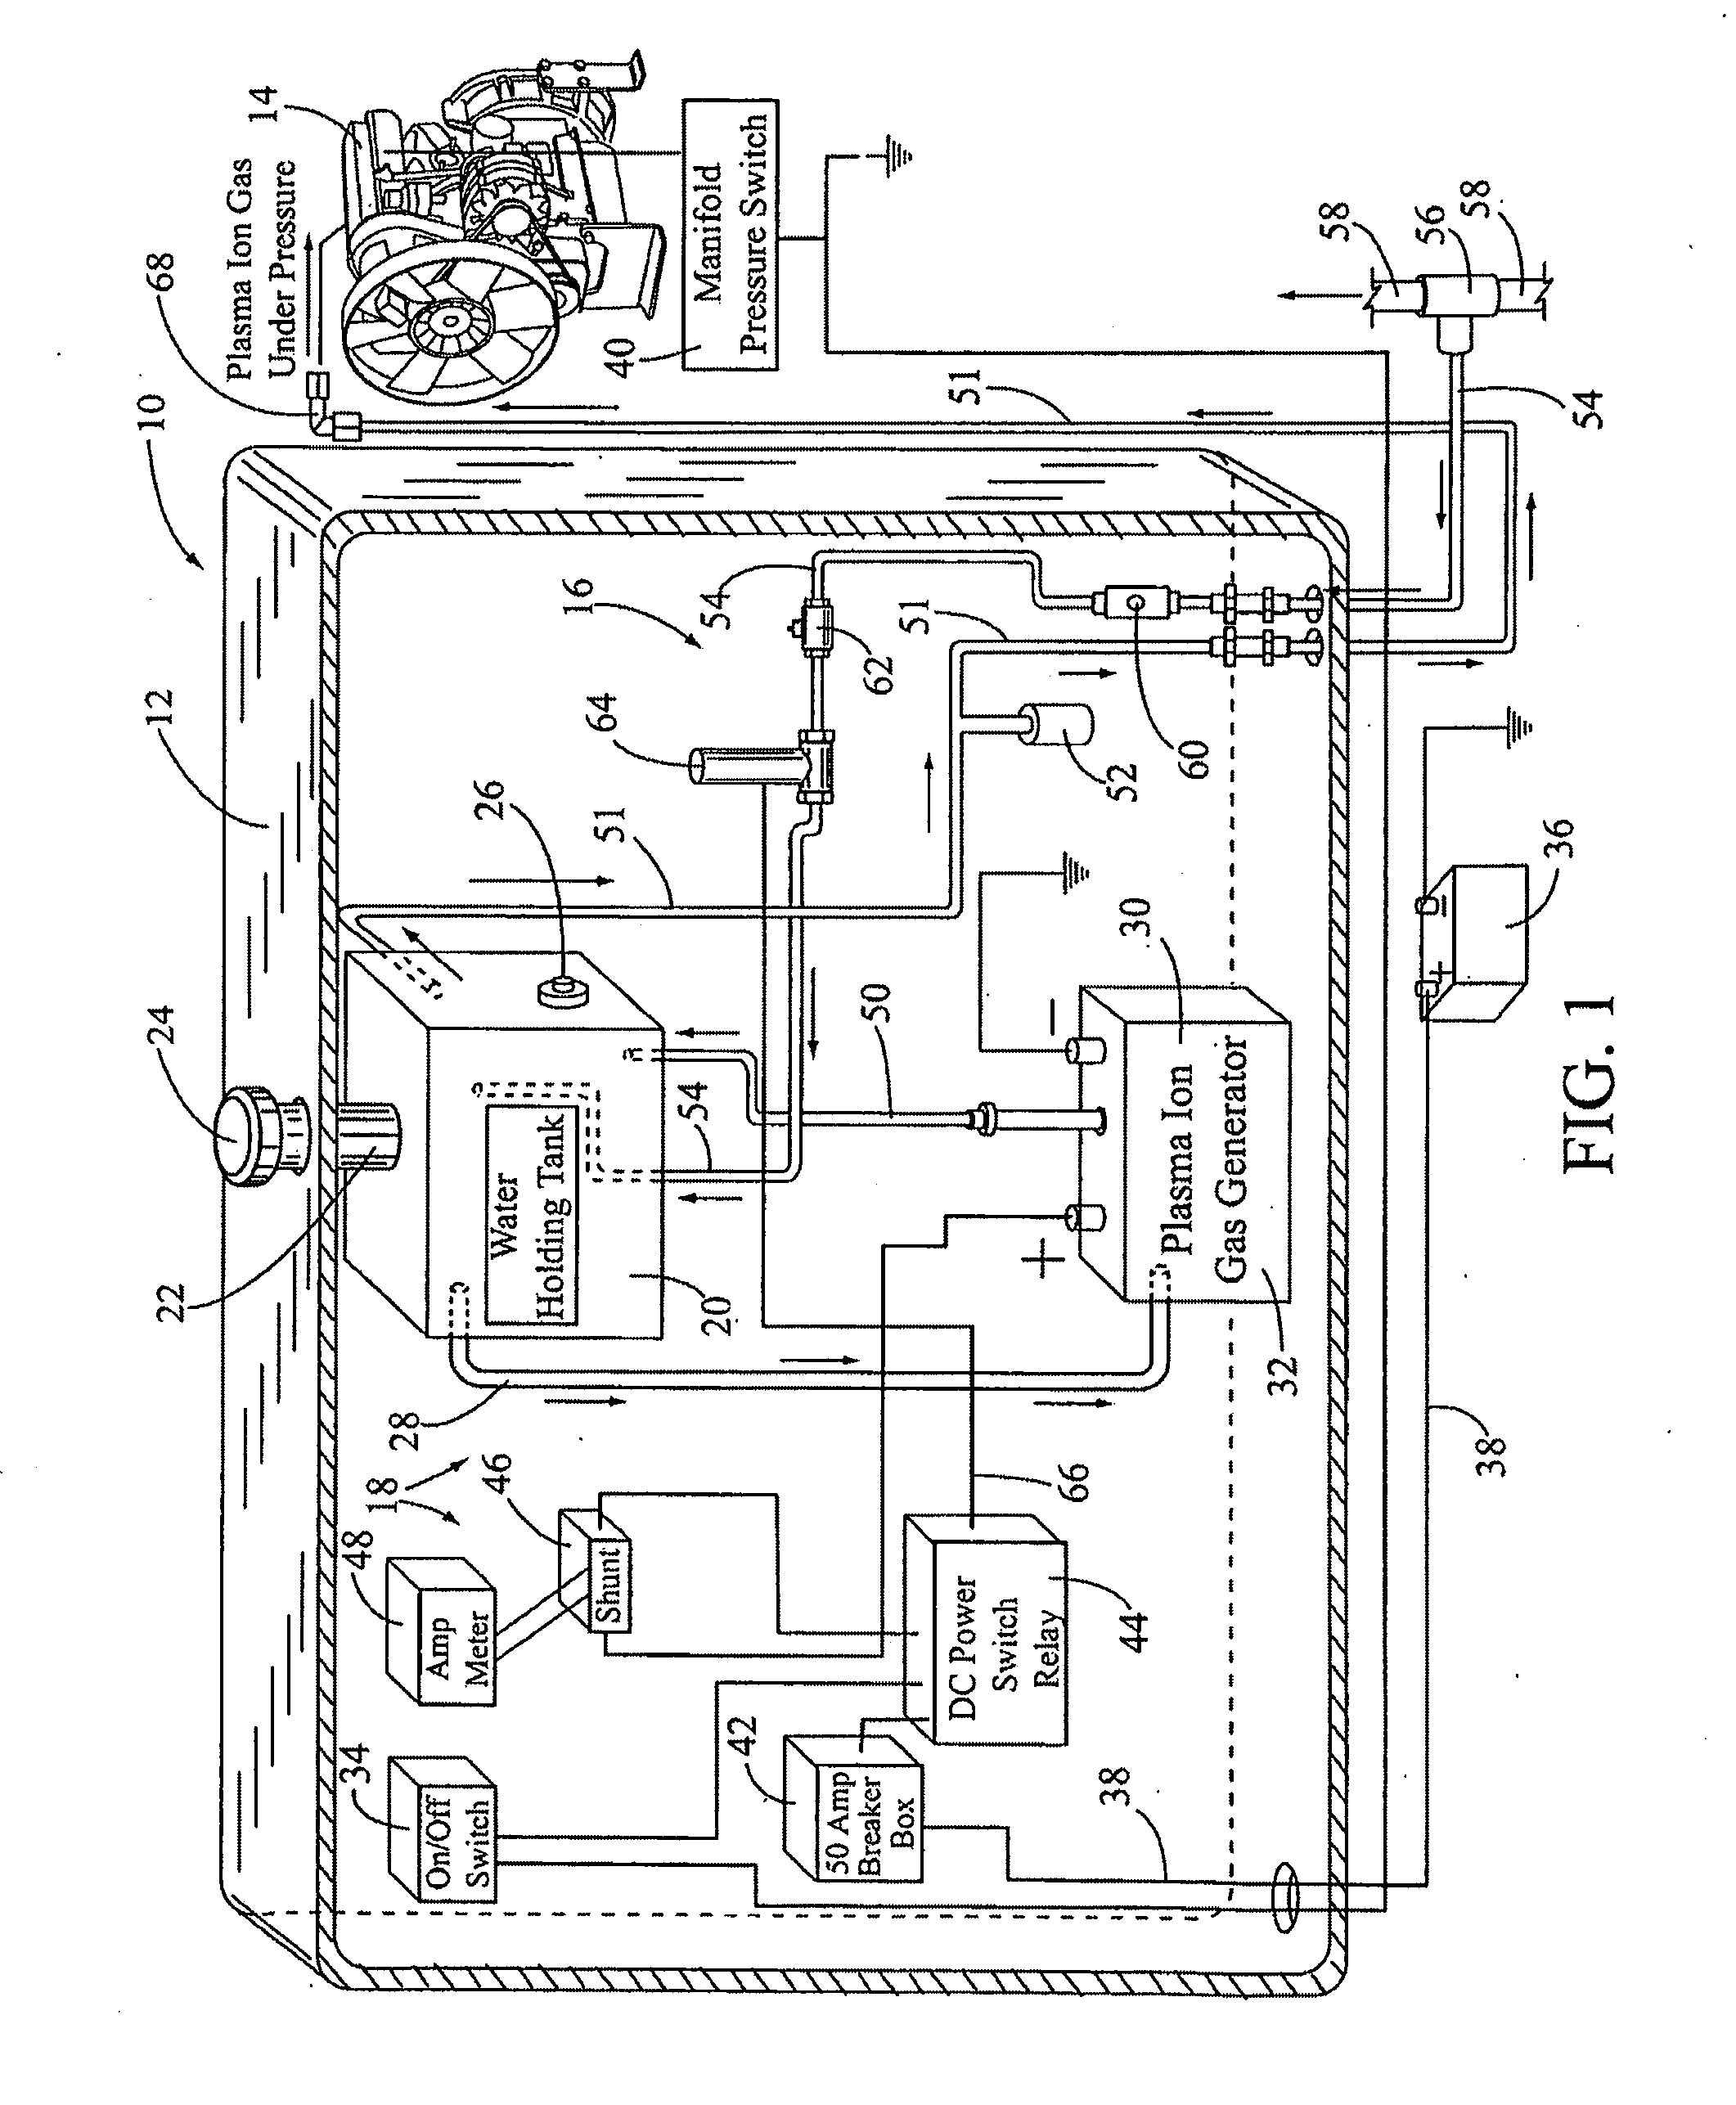 Combination air pressure system and plasma ion gas generator system for turbocharged diesel engine